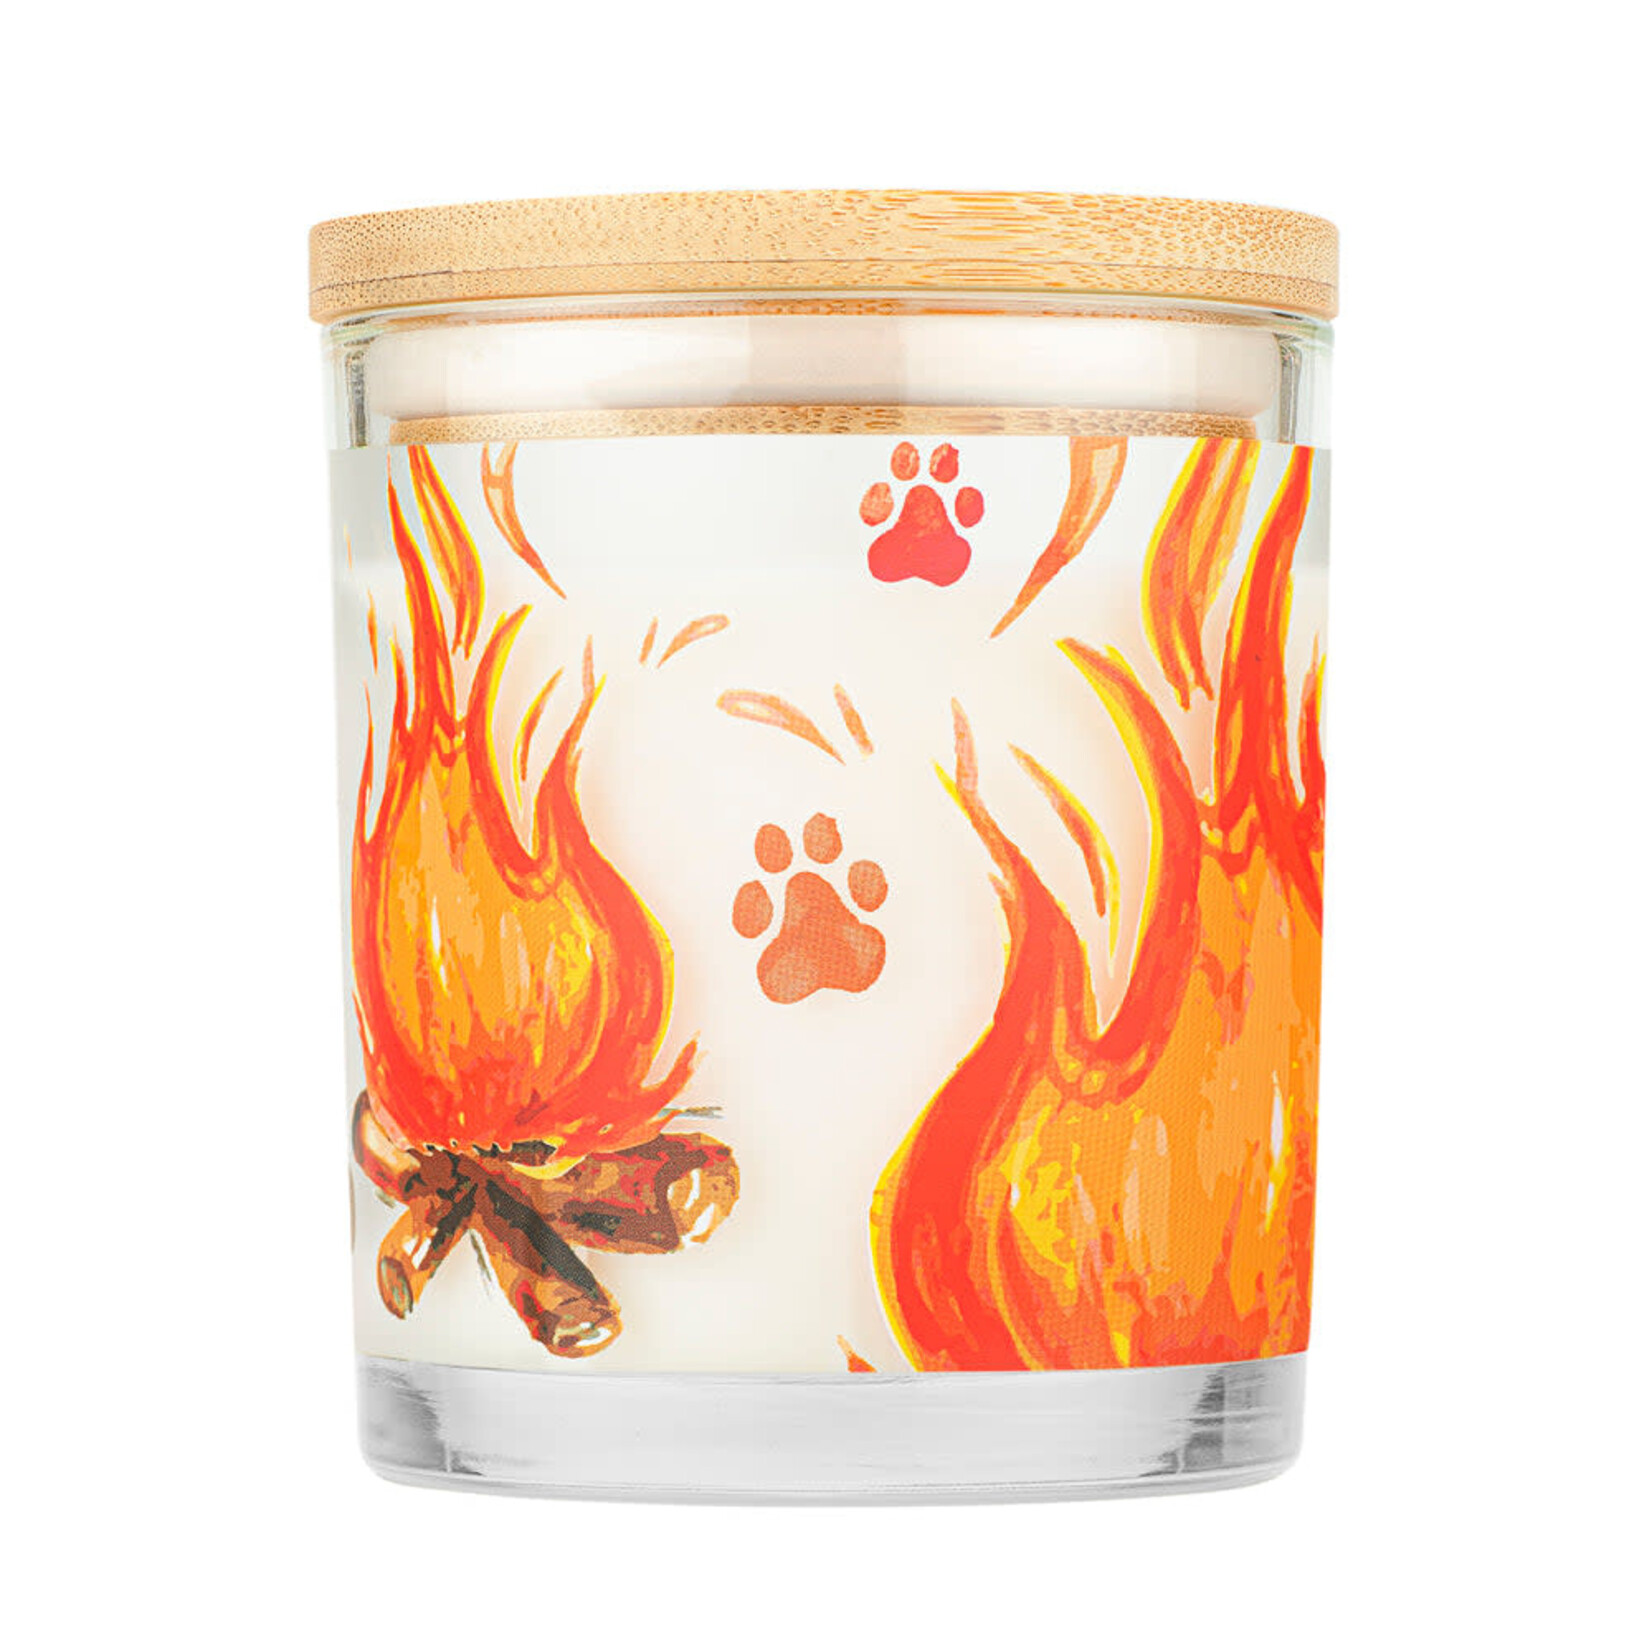 Pet House by One Fur All Fireside Pet Odor Candle